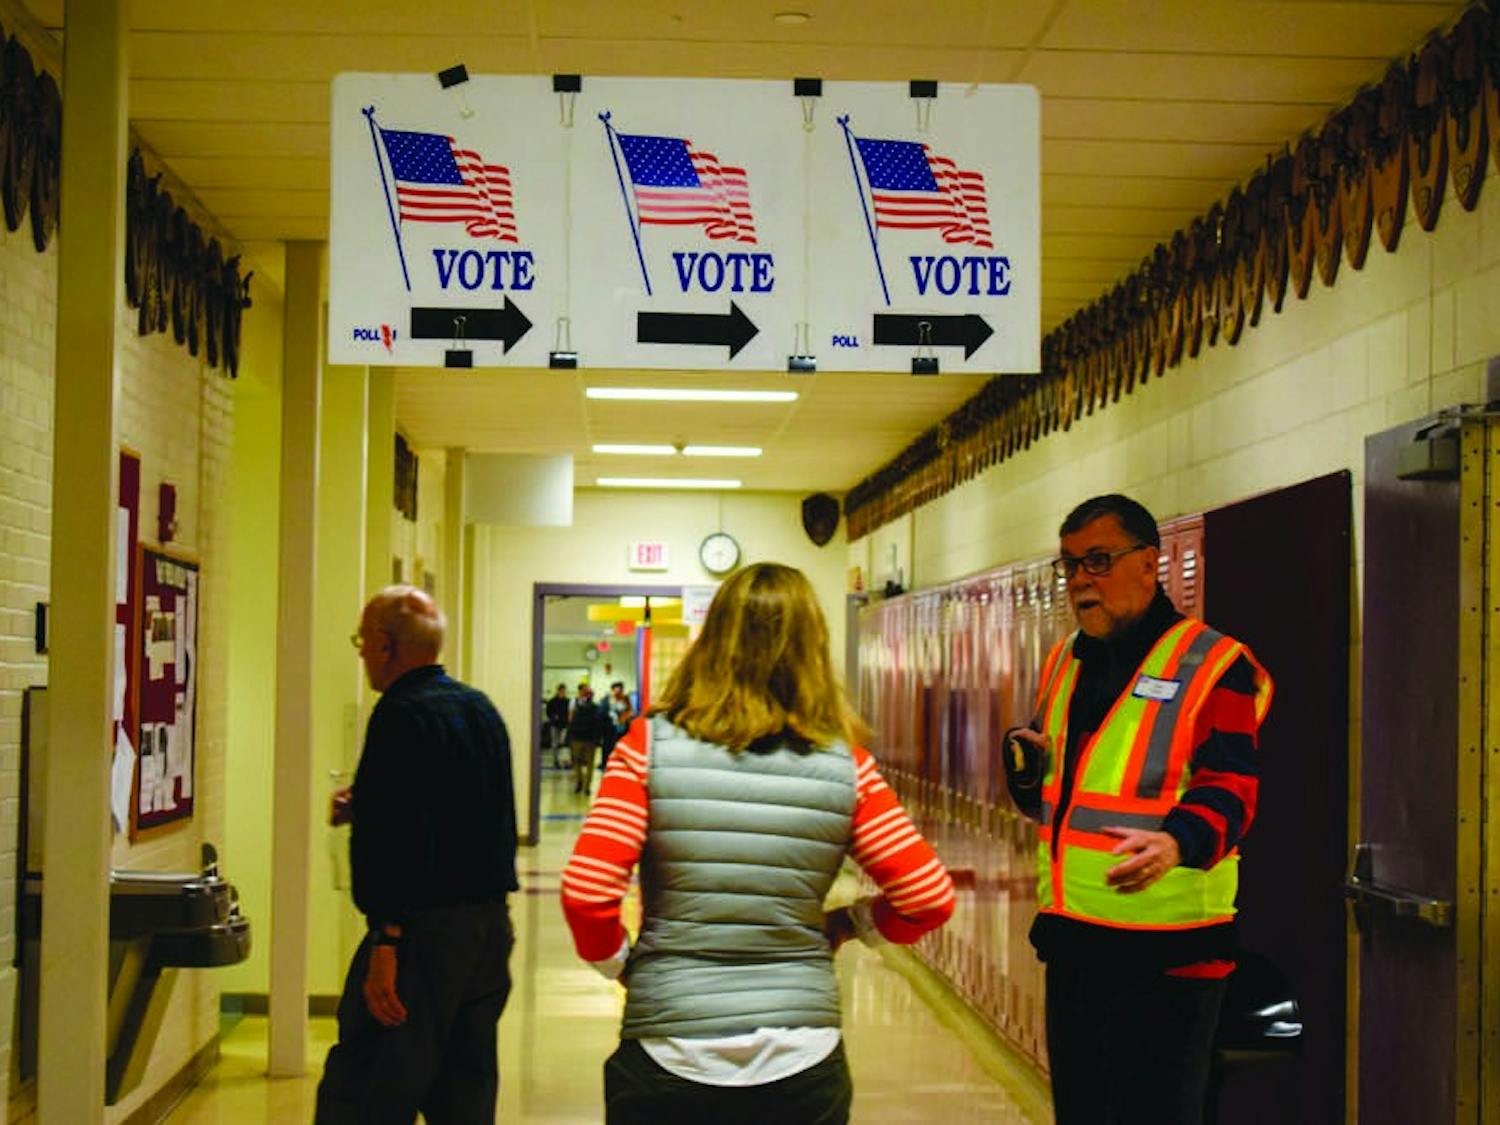 Hanover High School is the designated voting place in Hanover, NH.&nbsp;